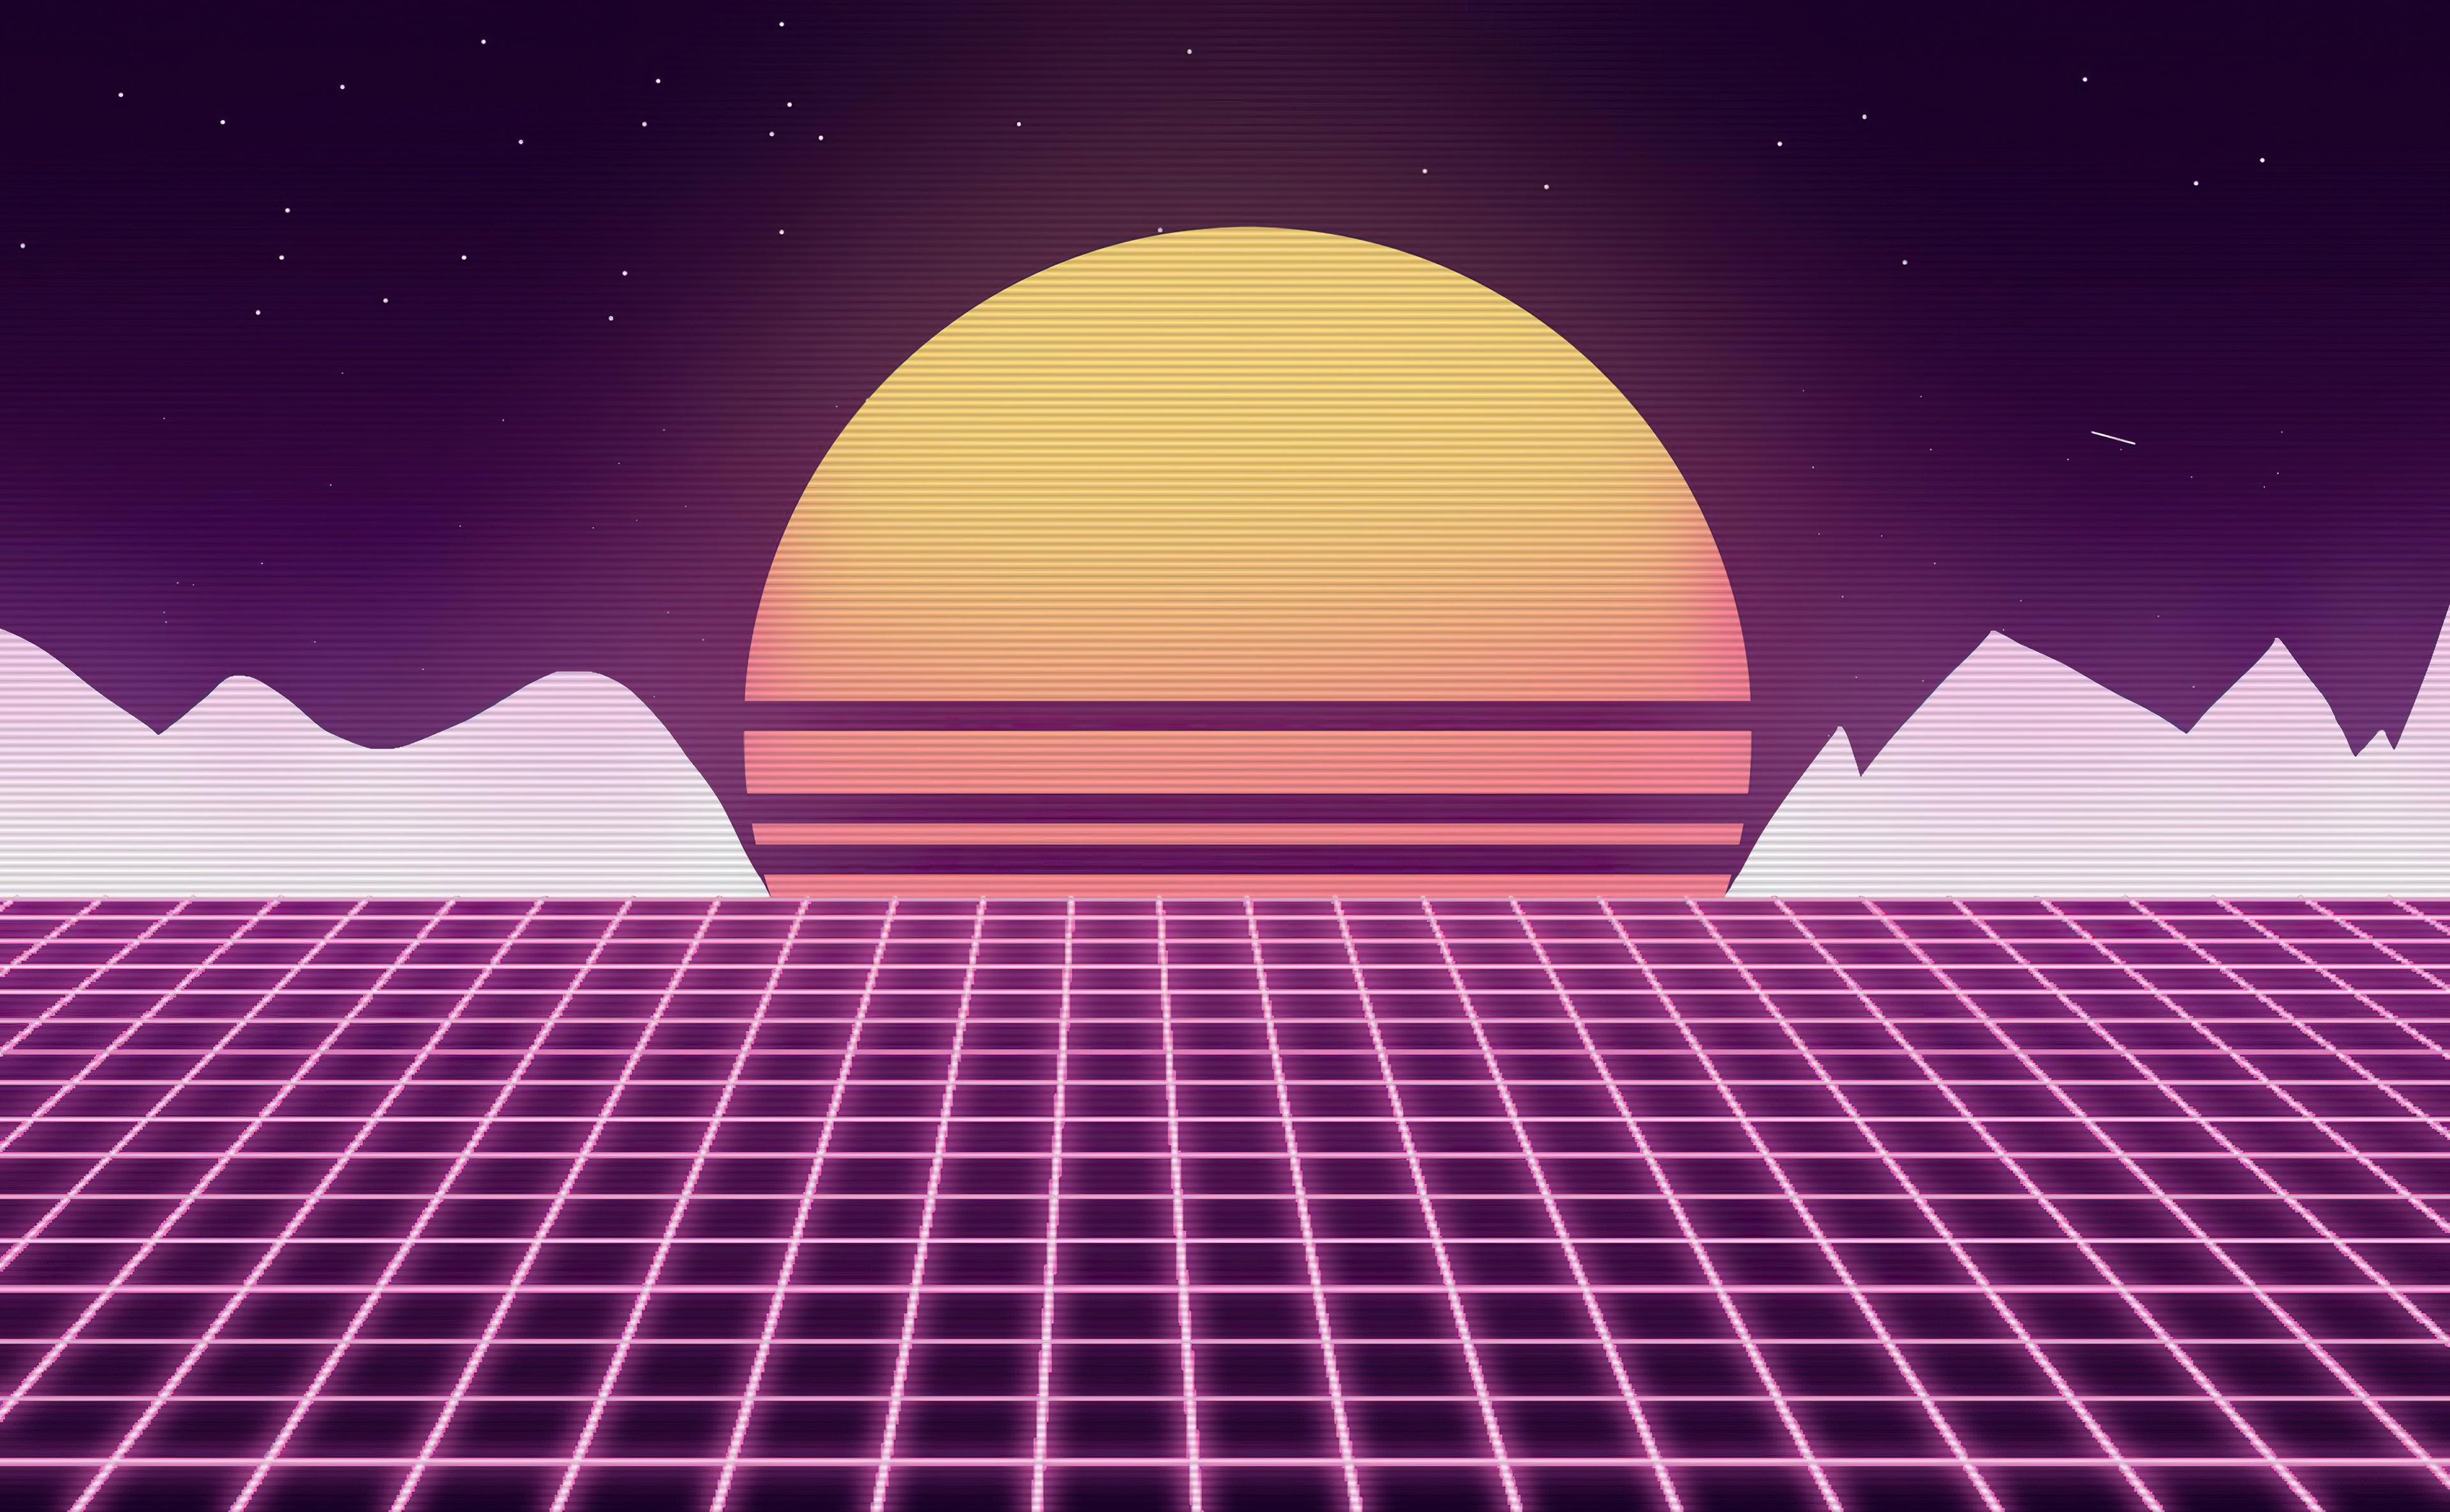 A sunset over a neon grid with mountains in the background - Synthwave